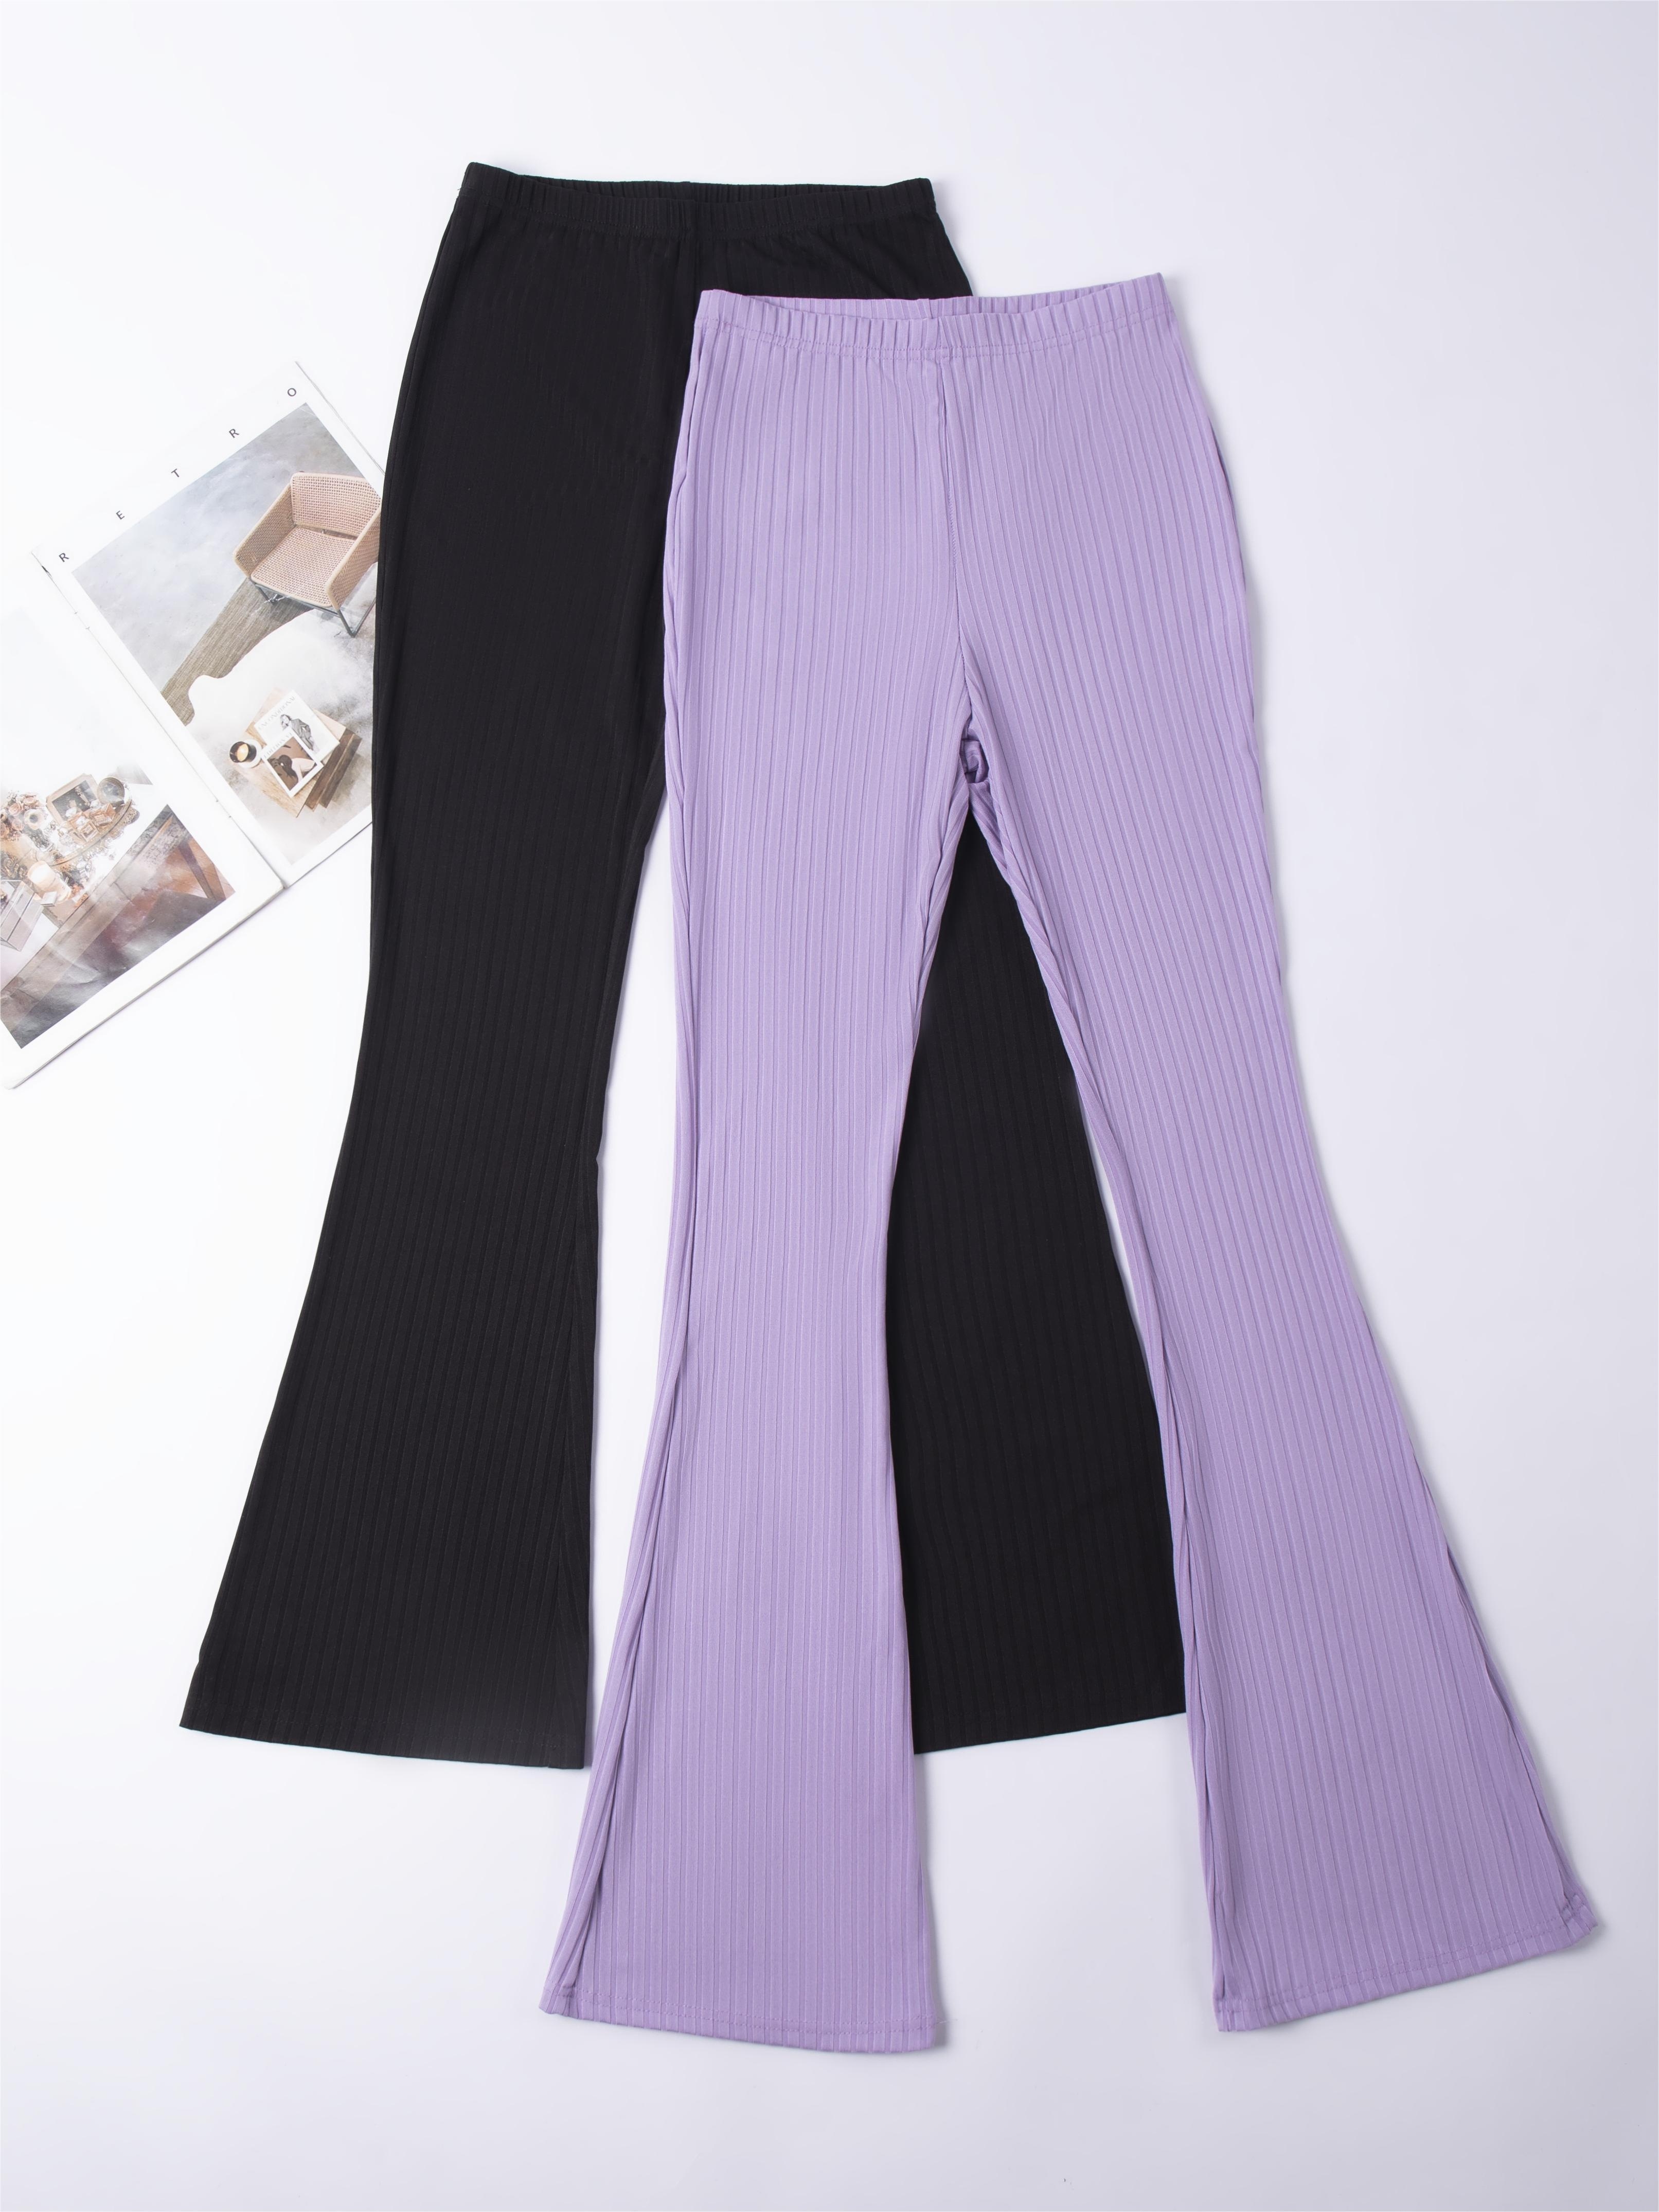 BUIgtTklOP Pants for Women,Women'S Casual Temperament Solid Color Knitted  Micro Pull Slim Flare Trousers Purple XL 